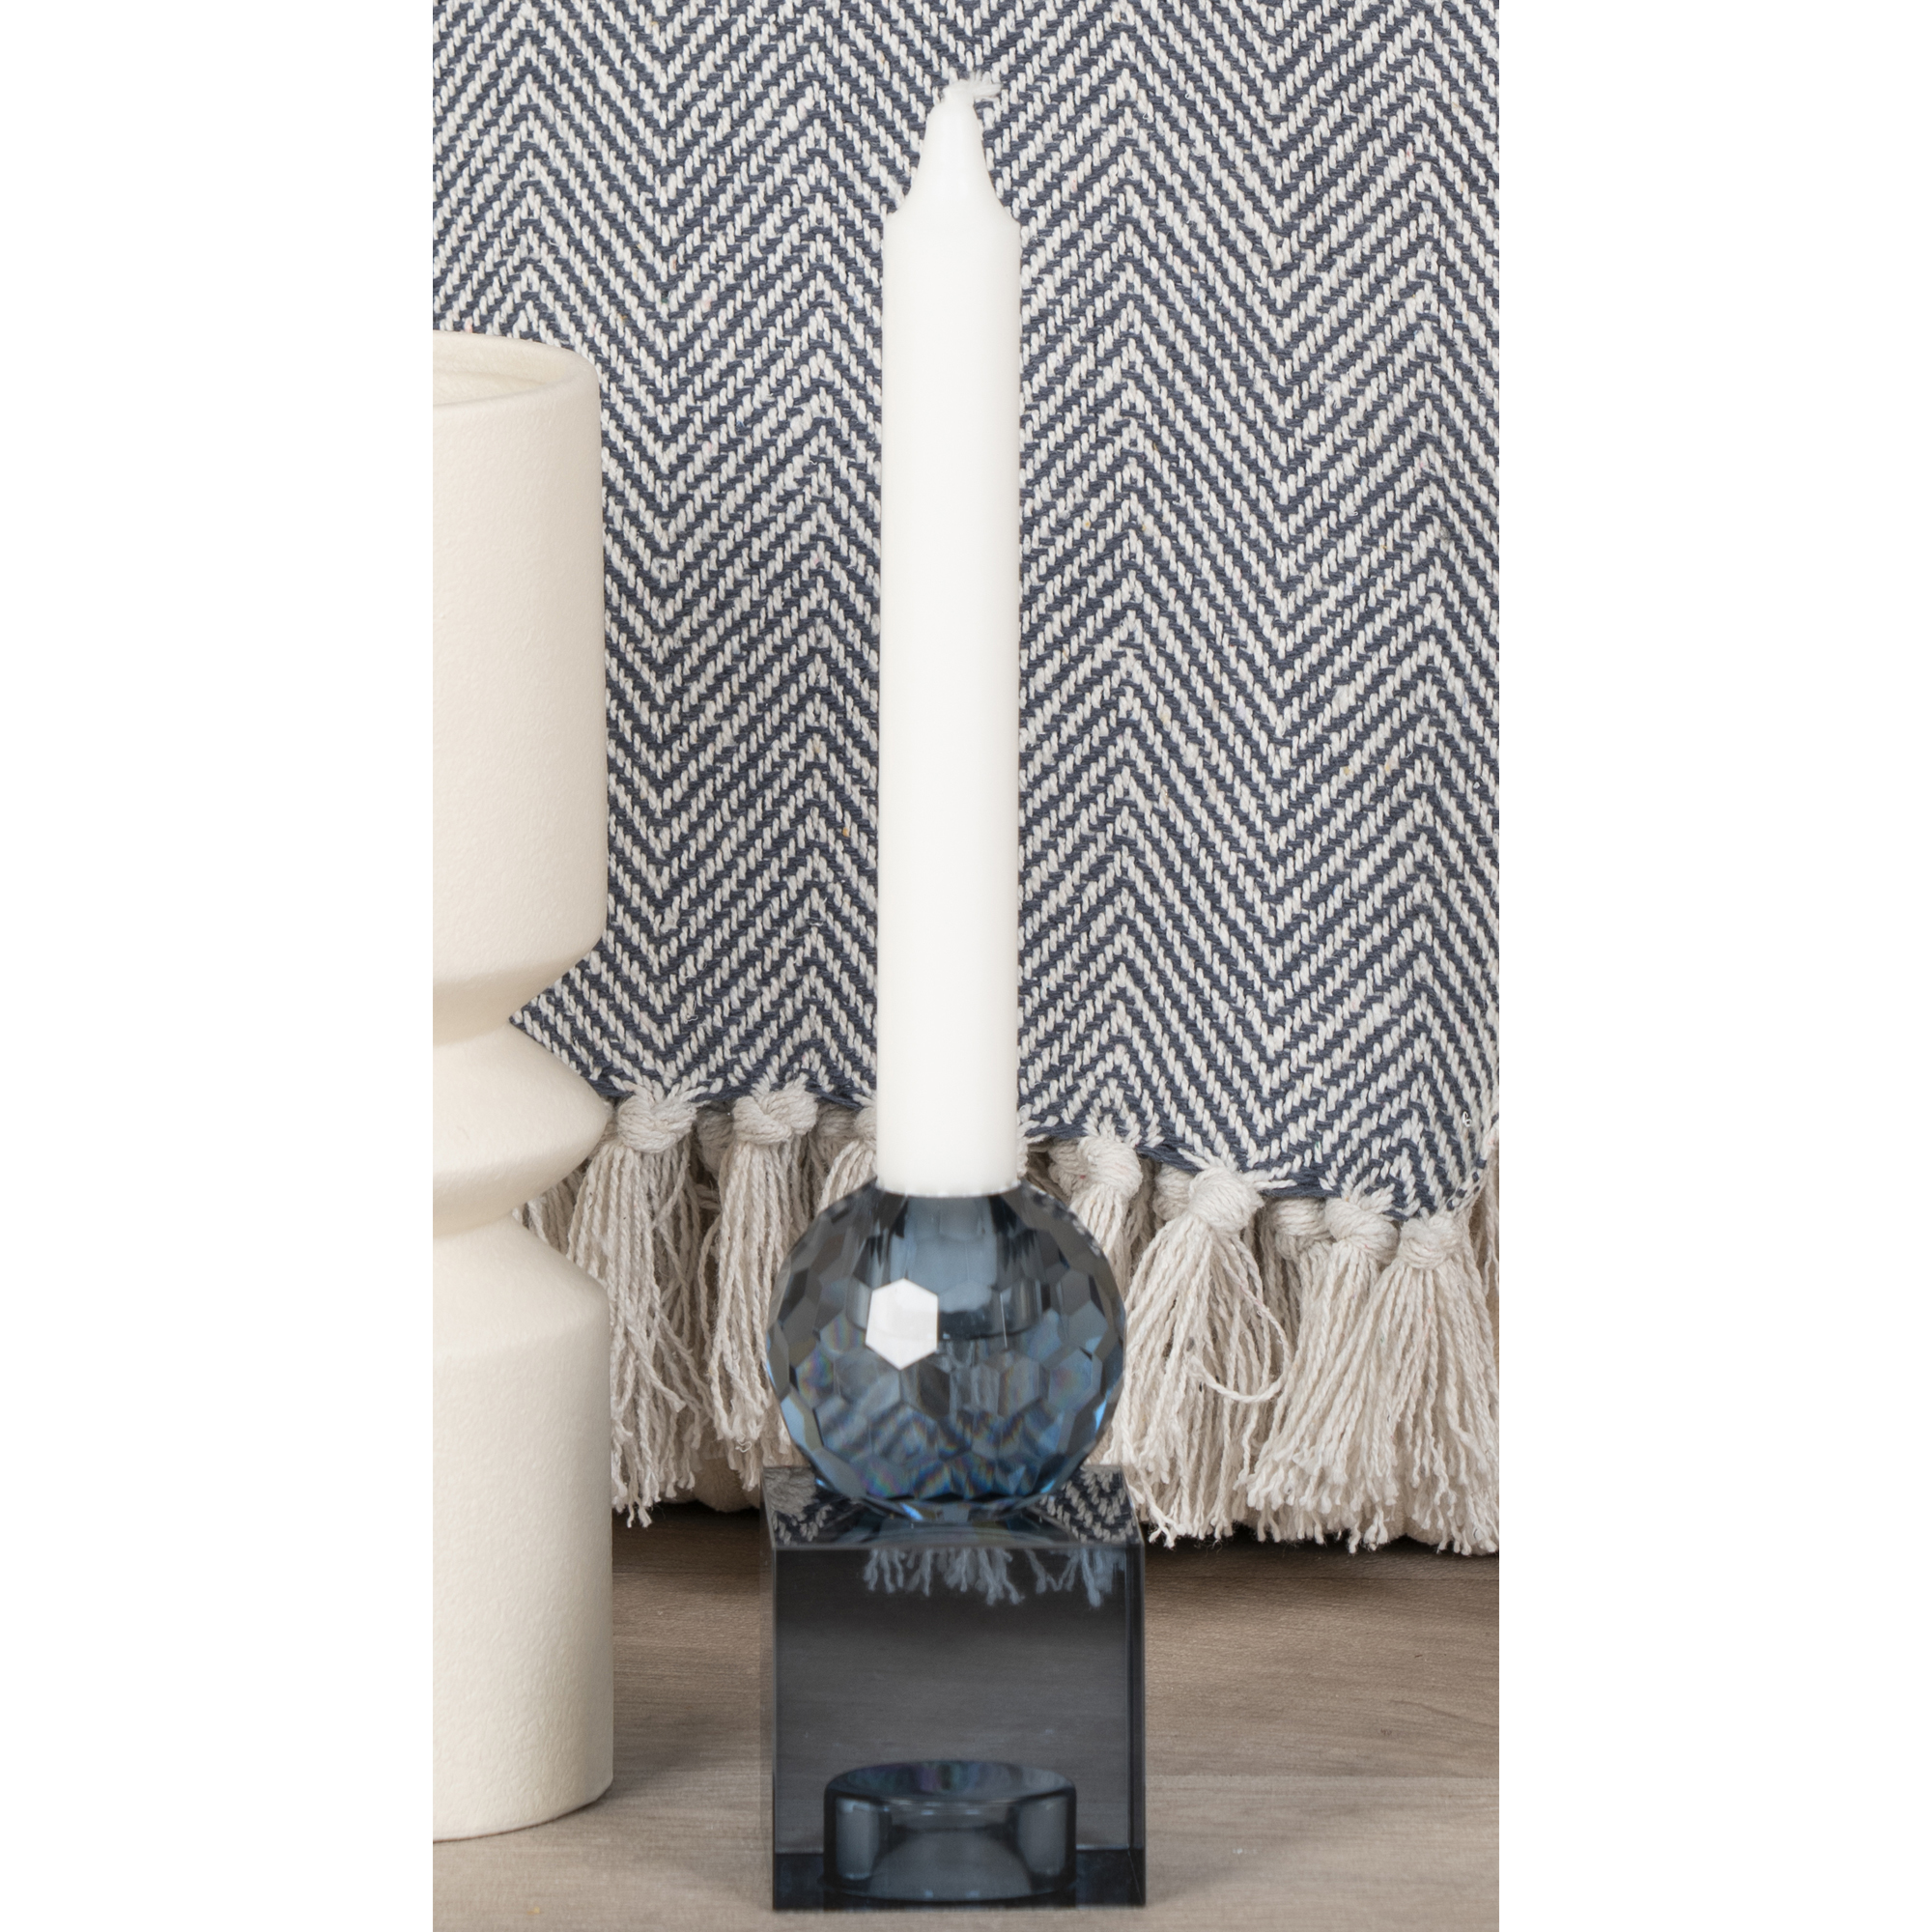 Torcello Candle Holder - Candle holder in blue glass